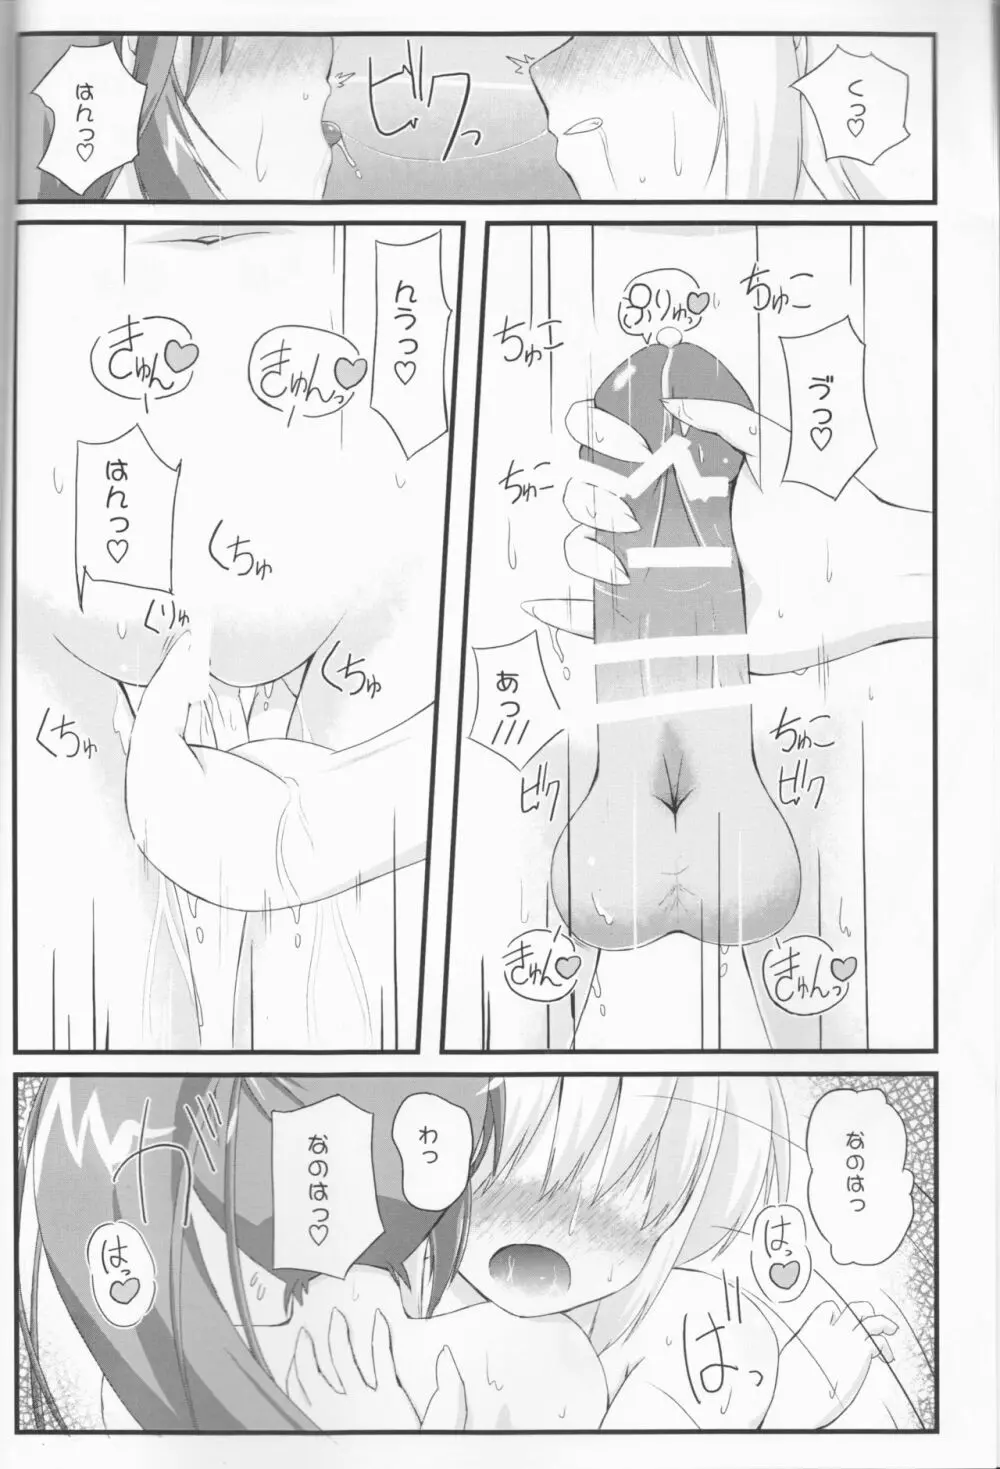 Pure Heart 11th Episode ～Dense Time～ - page3